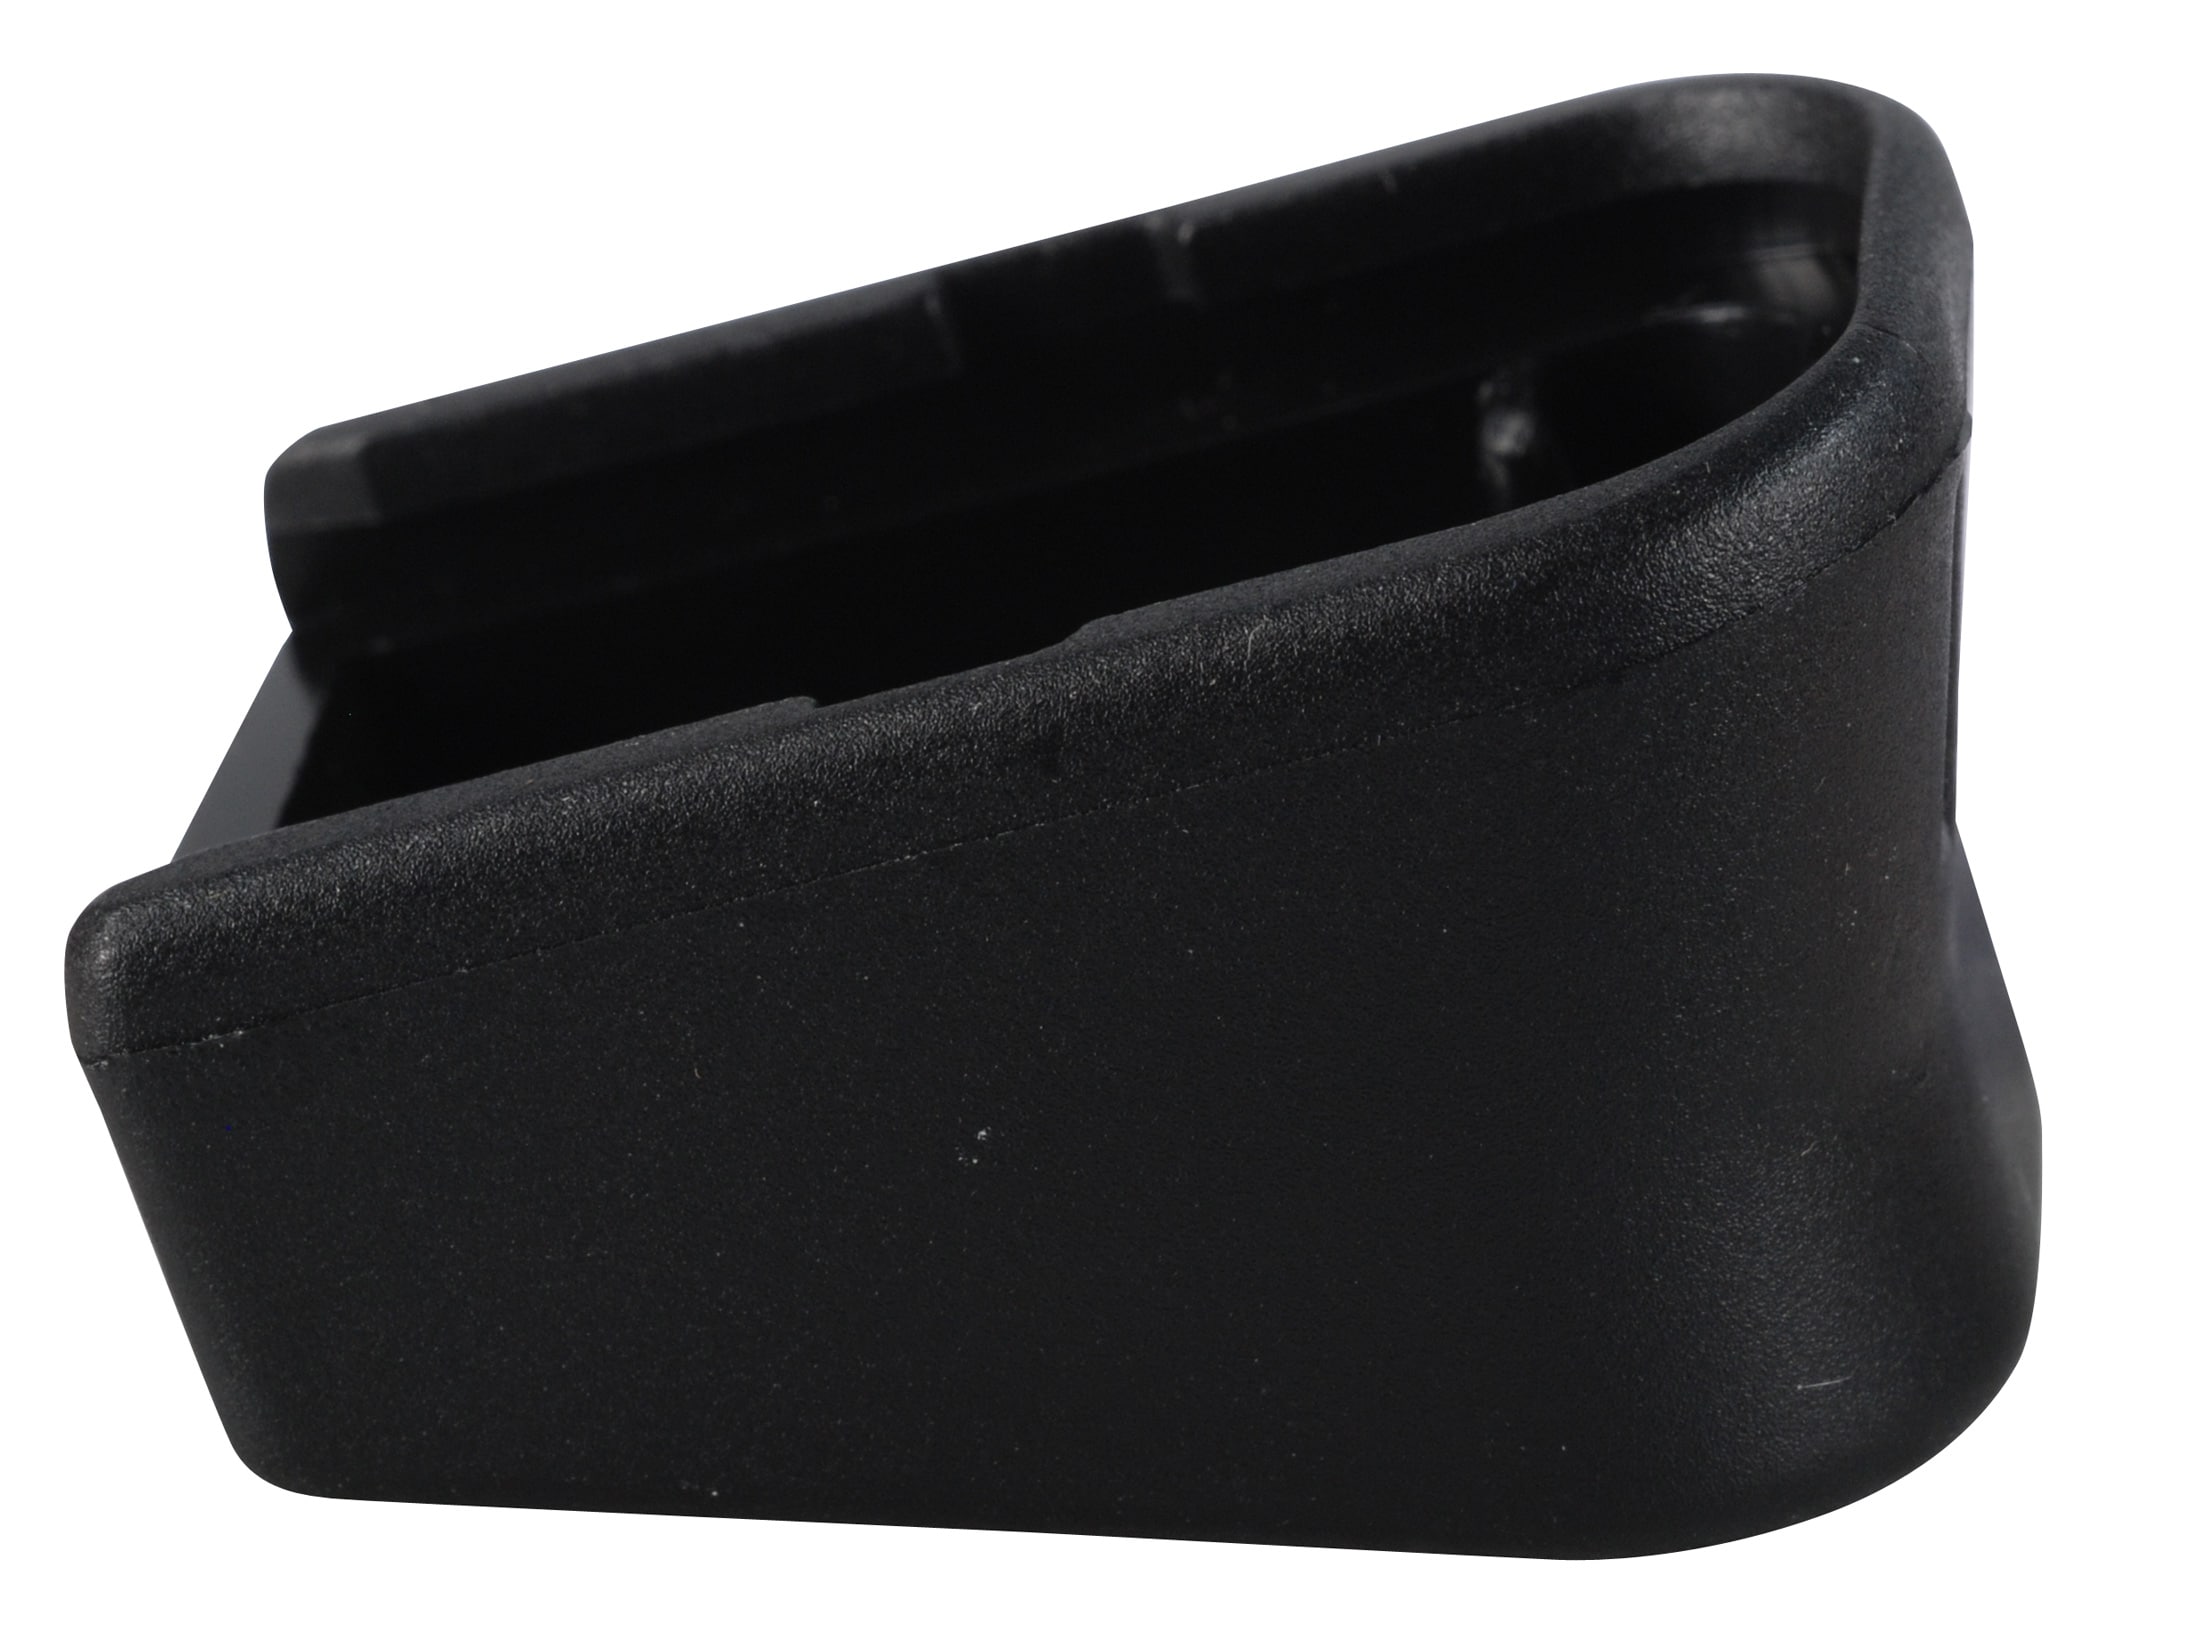 22 23 27 31 Add 2 Magazine Base Extension Bottom Mag Plates For GLOCK 17 19...